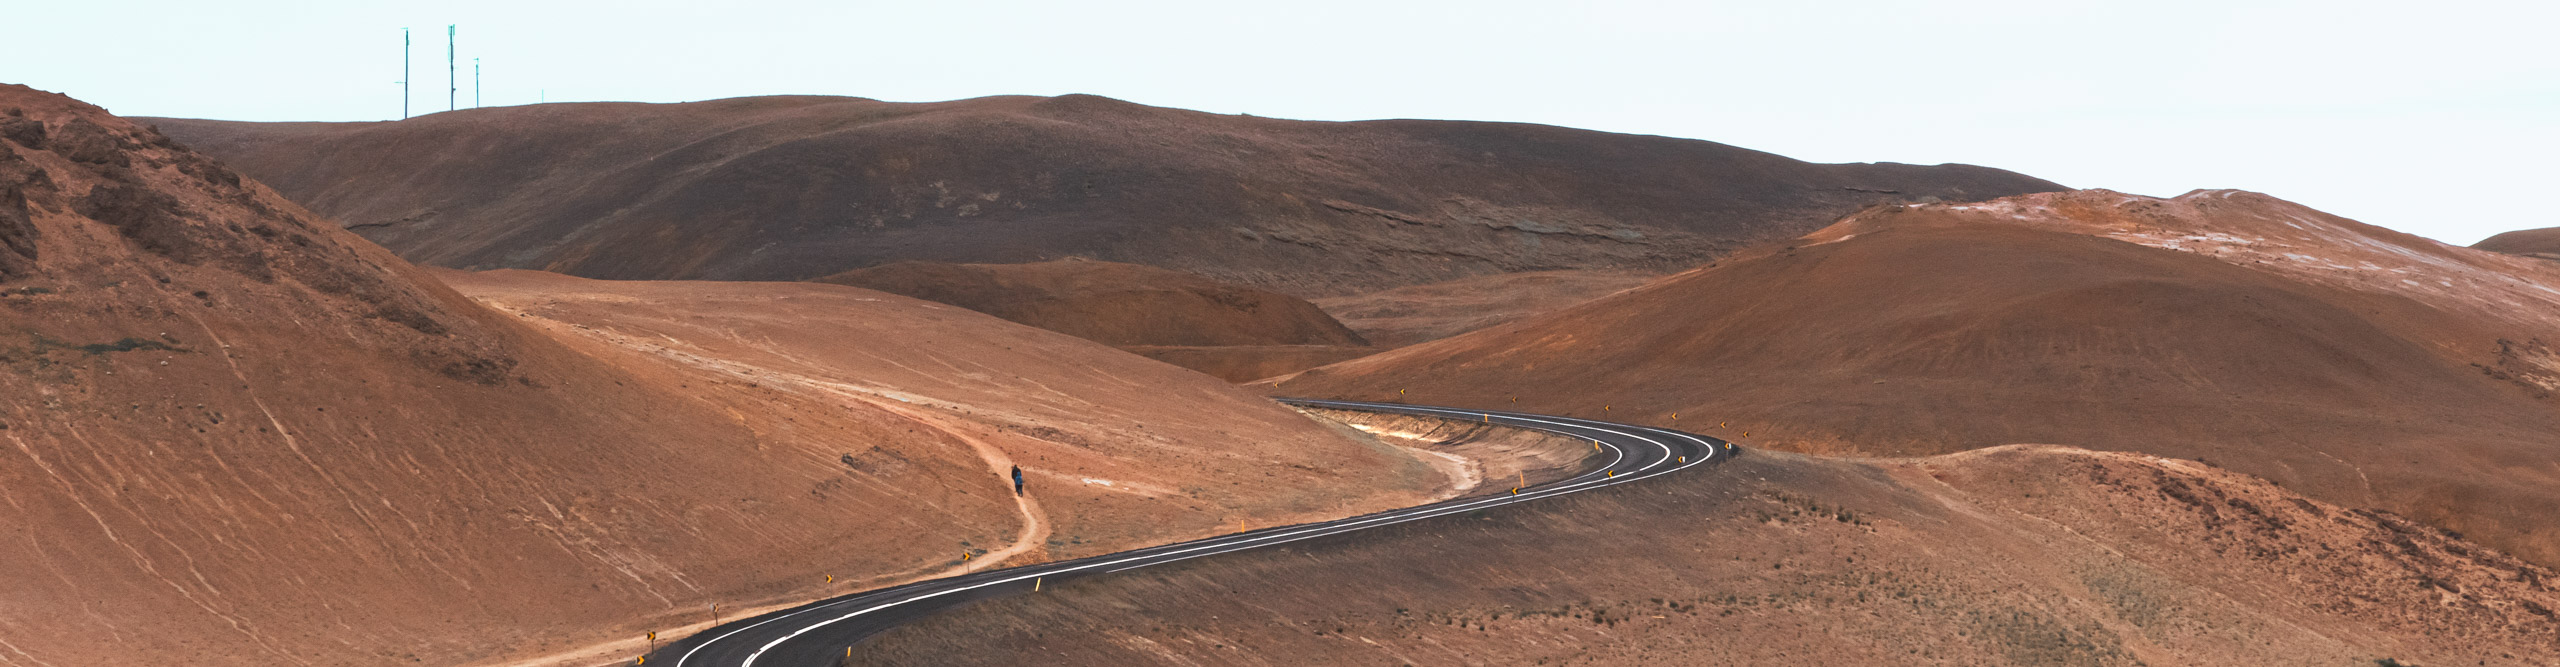 A road snaking through the beautiful brown and orange tones of the hills in Iceland 